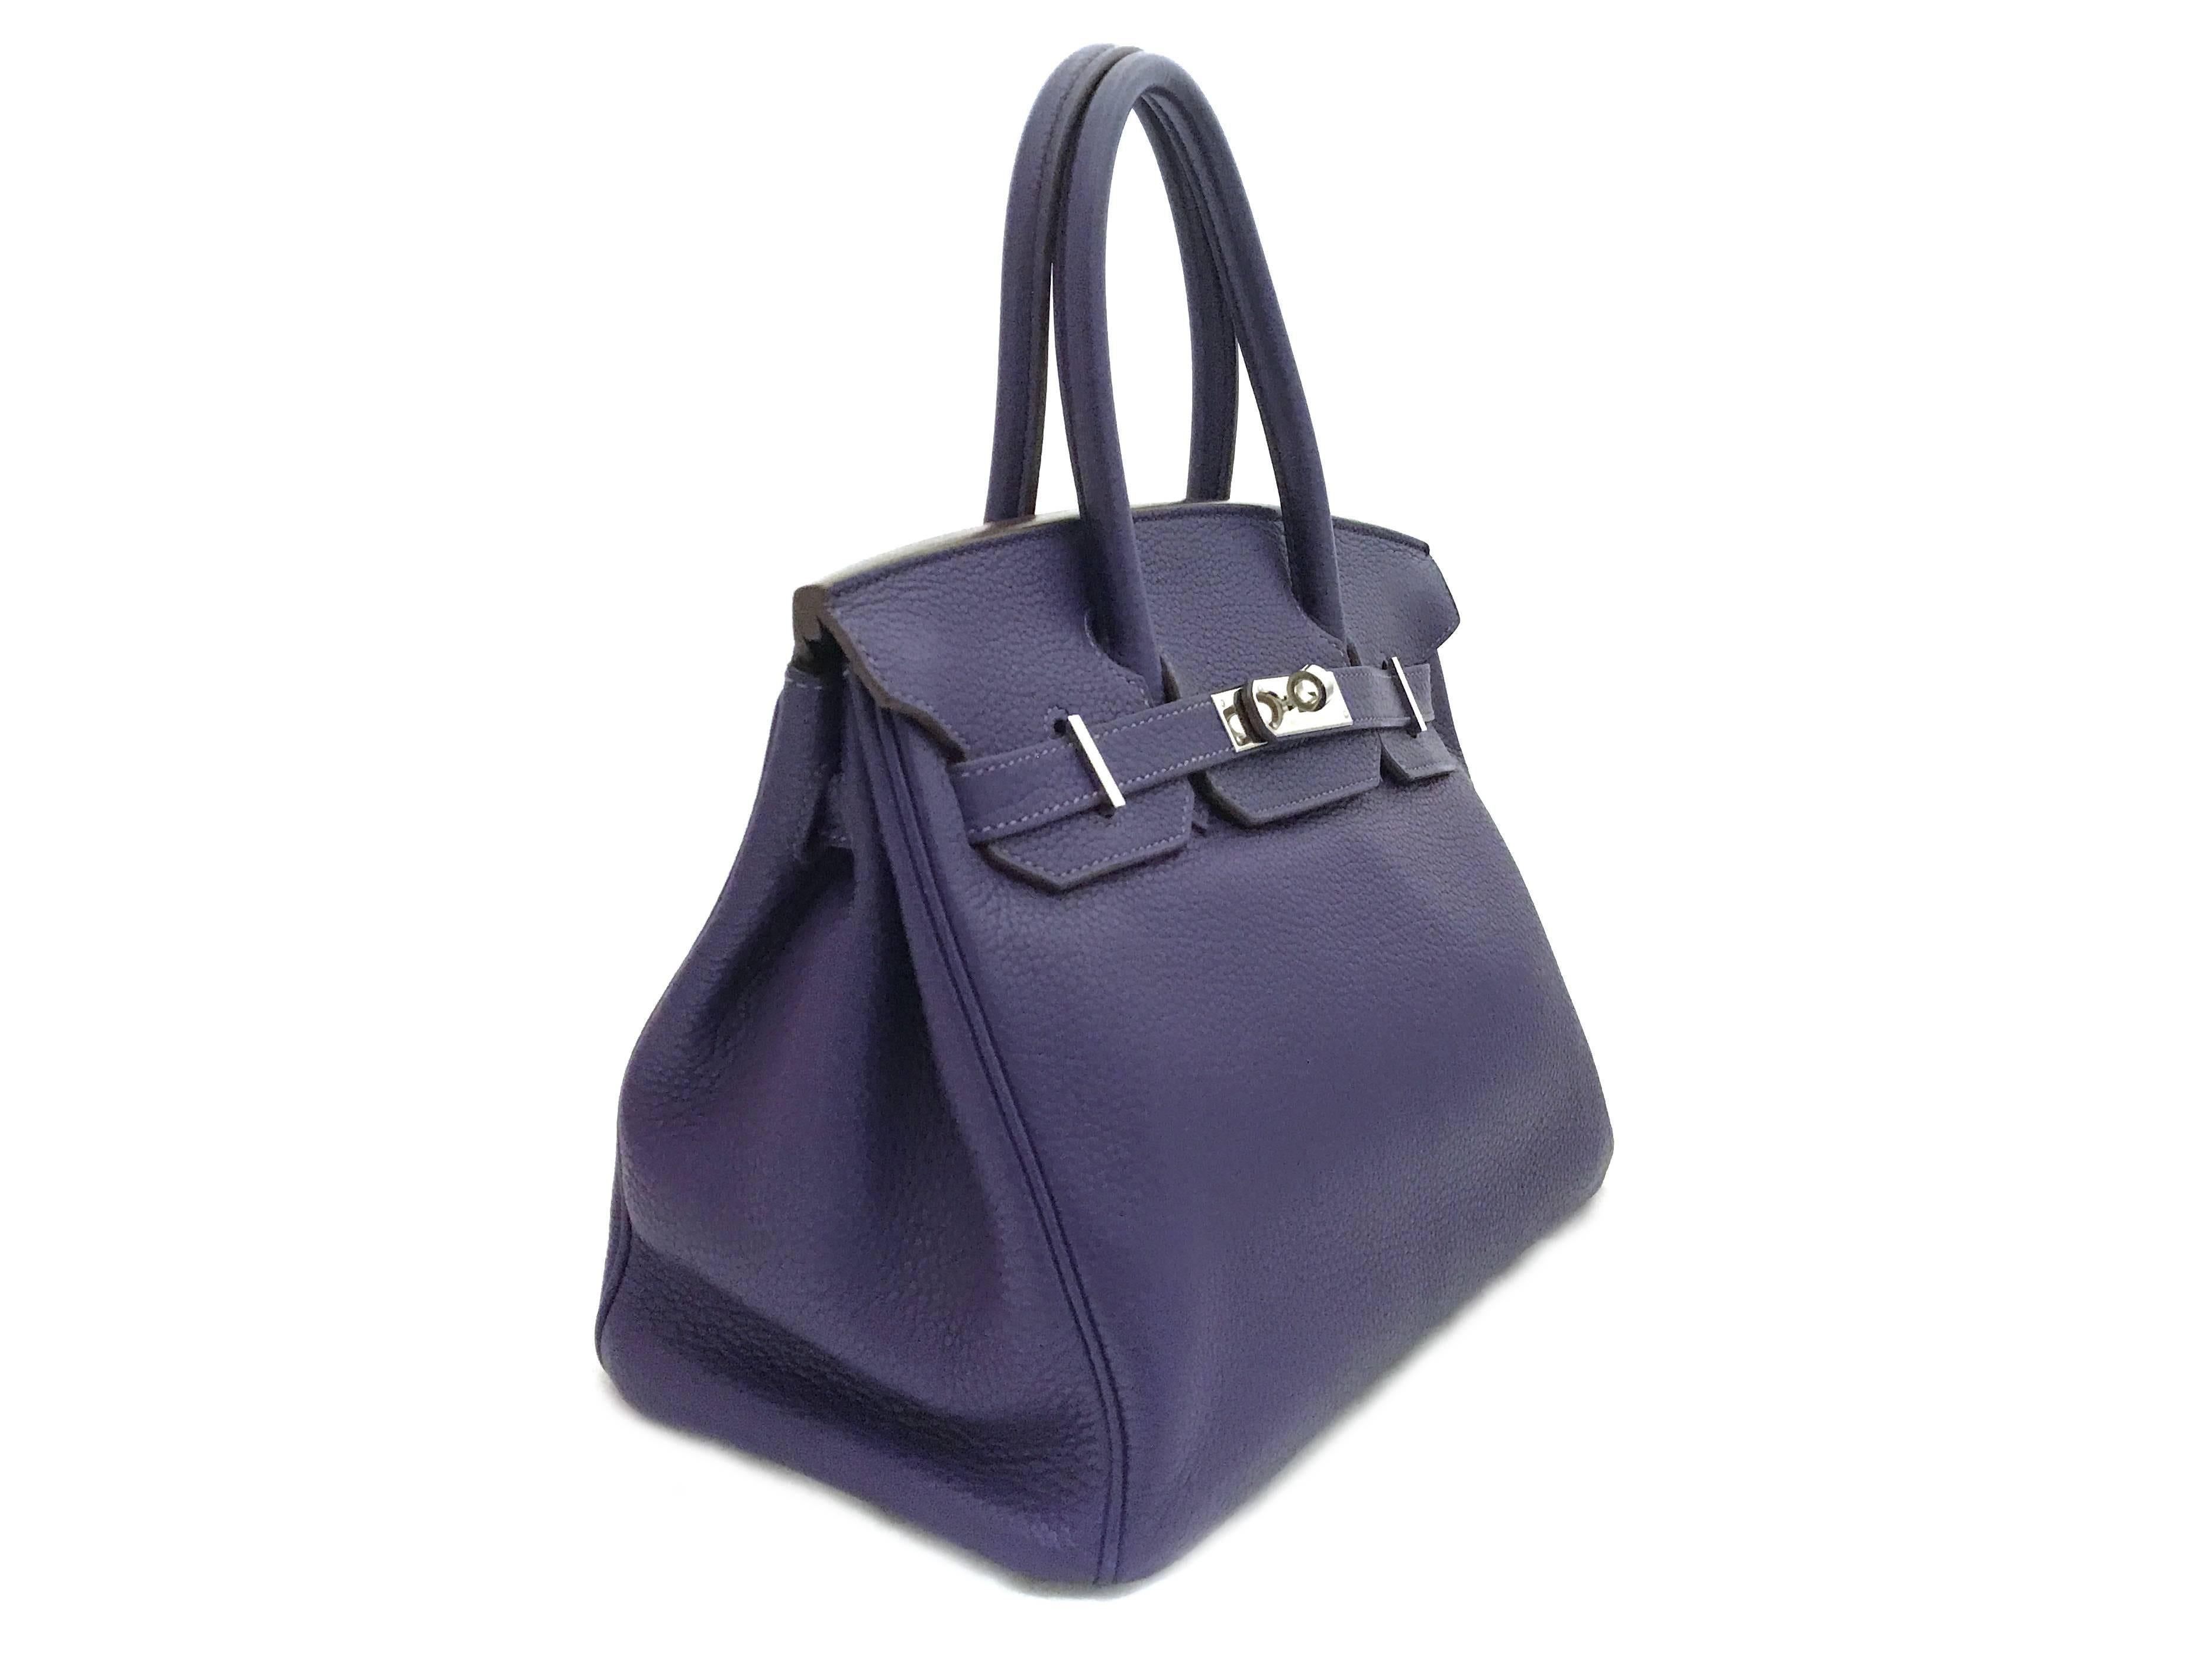 Color: Purple / Iris (designer color) 

Material: Togo Leather

Condition: Rank A 
Overall: Good, few minor defects
Surface: Good
Corners: Minor Scratches
Edges: Good
Handles/Straps: Good
Hardware: Minor Scratches

Dimension: W30 × H19 ×